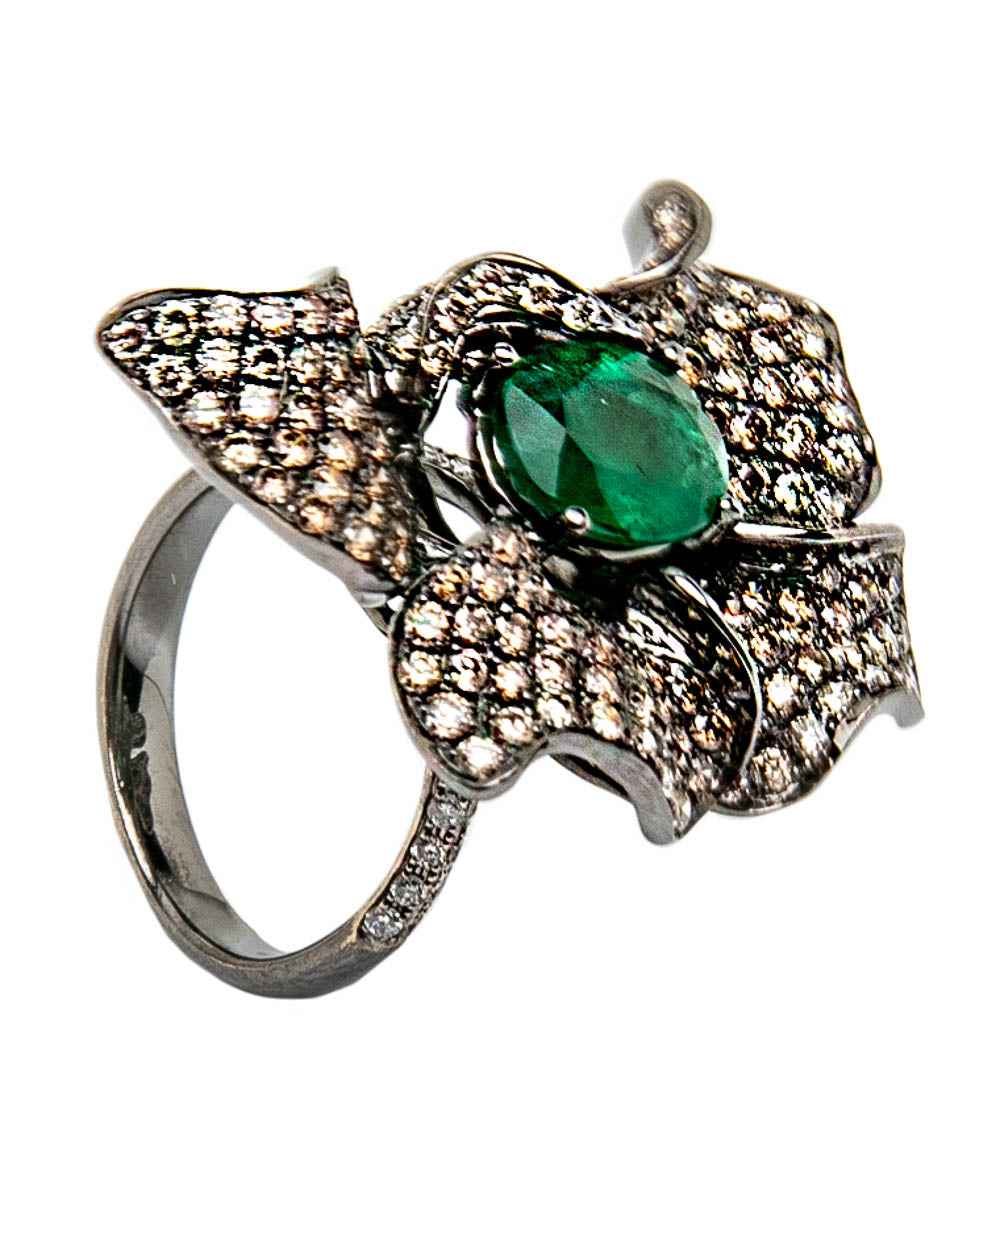 Emerald and Diamond Double Ring